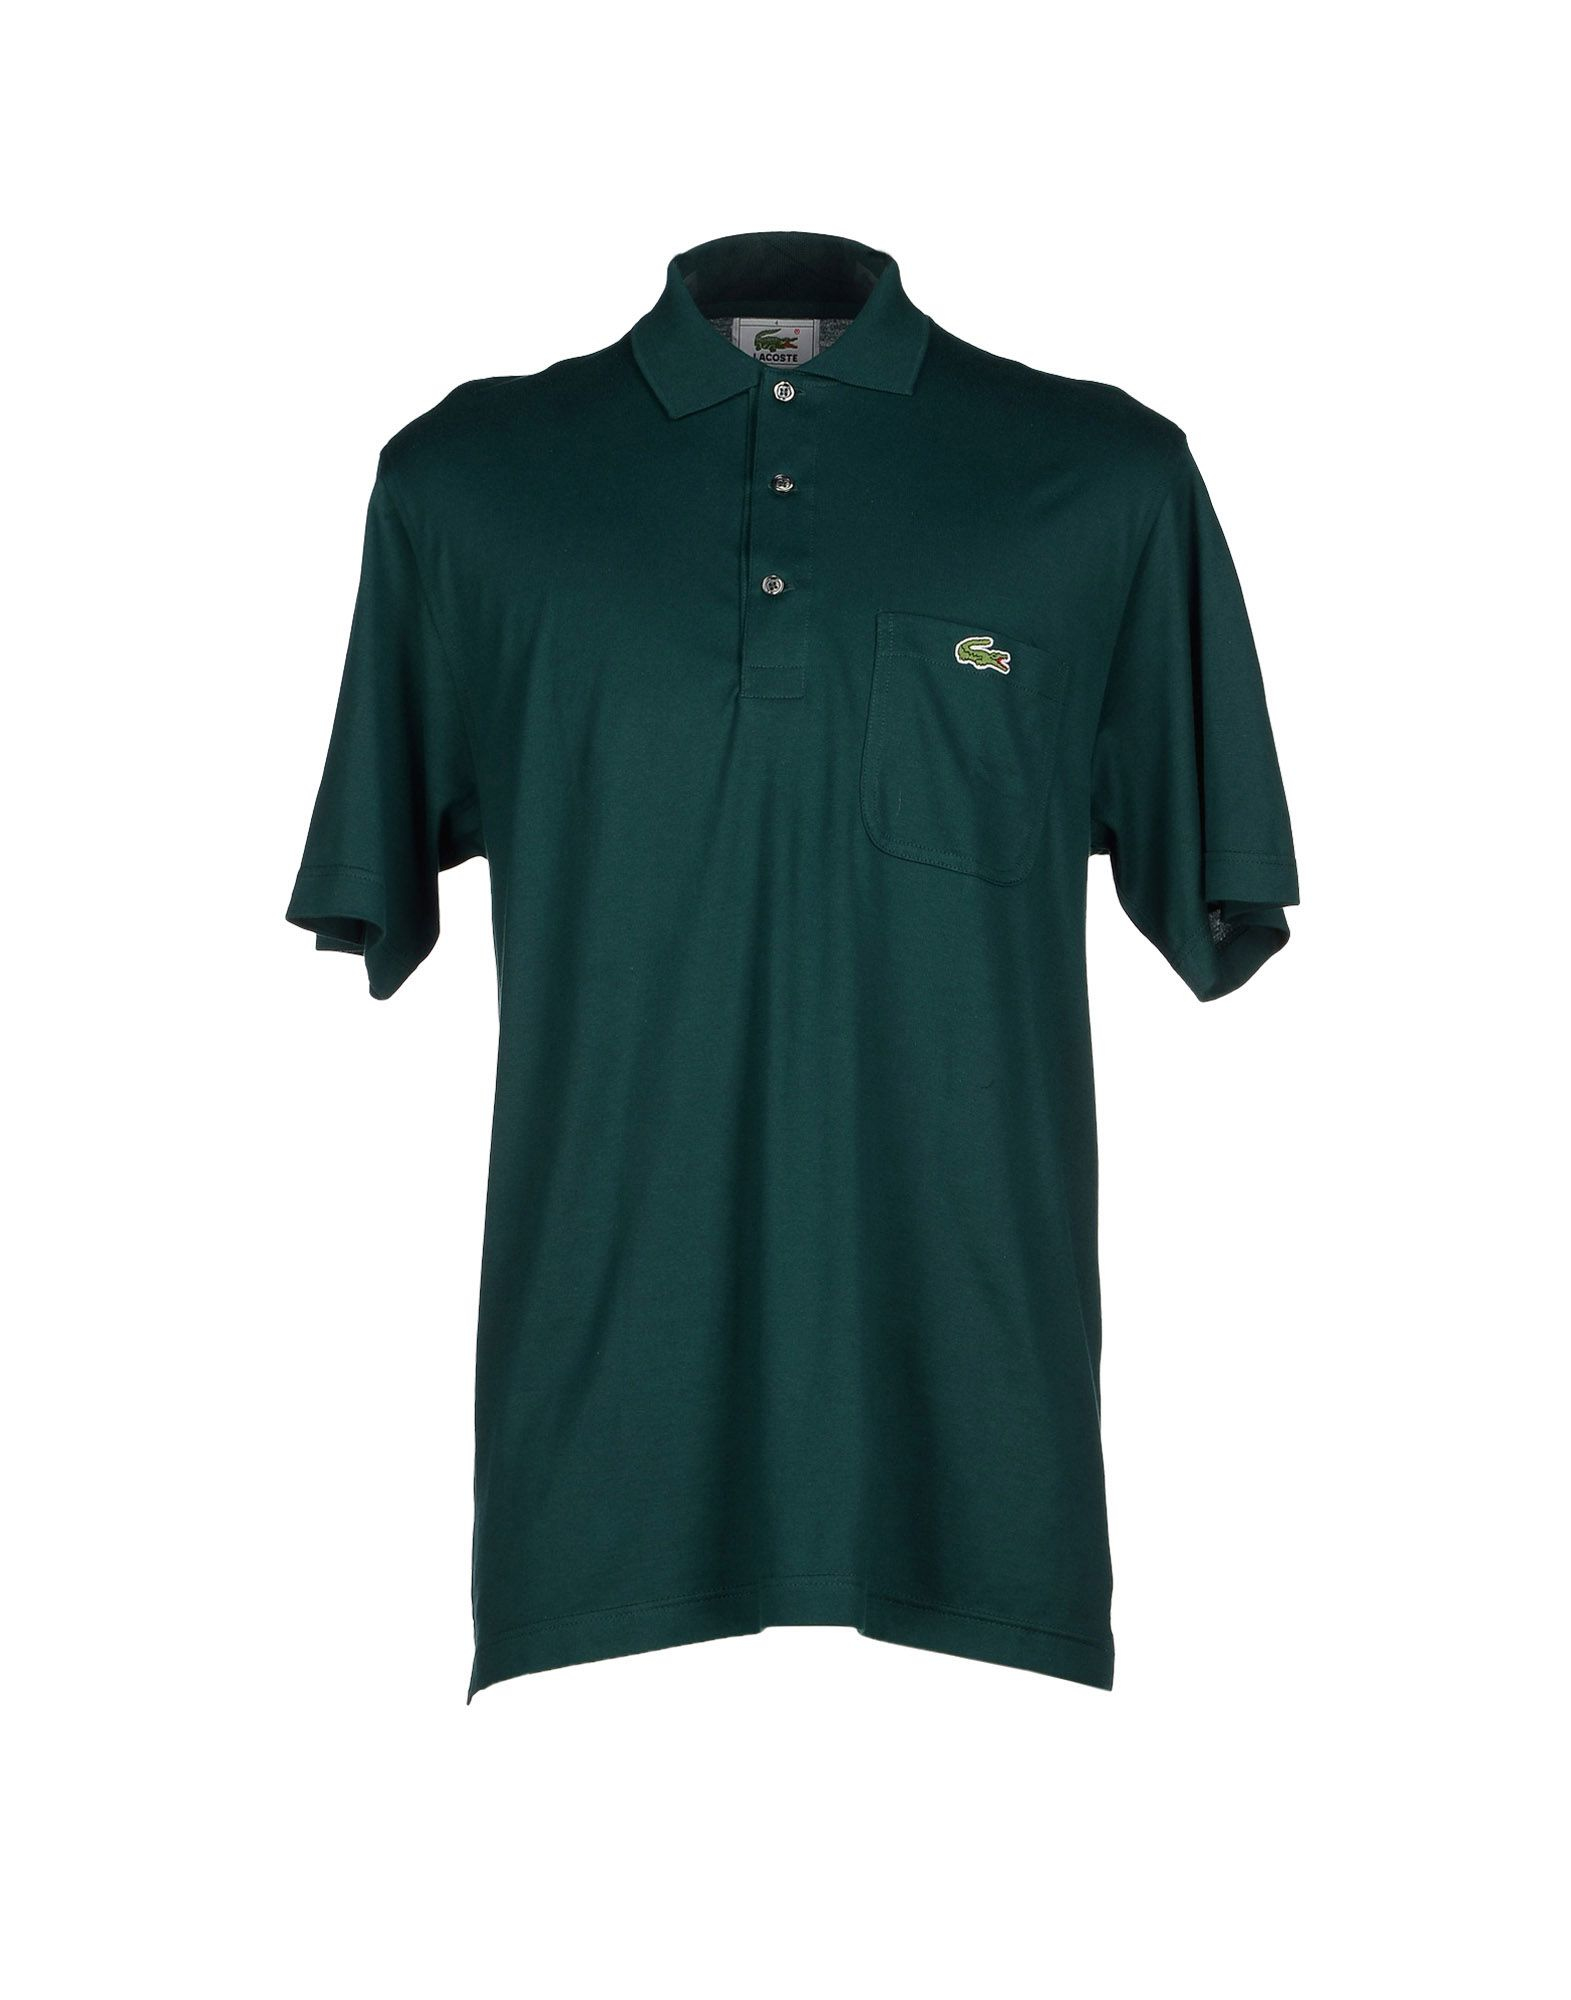 Lyst - Lacoste Polo Shirt in Green for Men